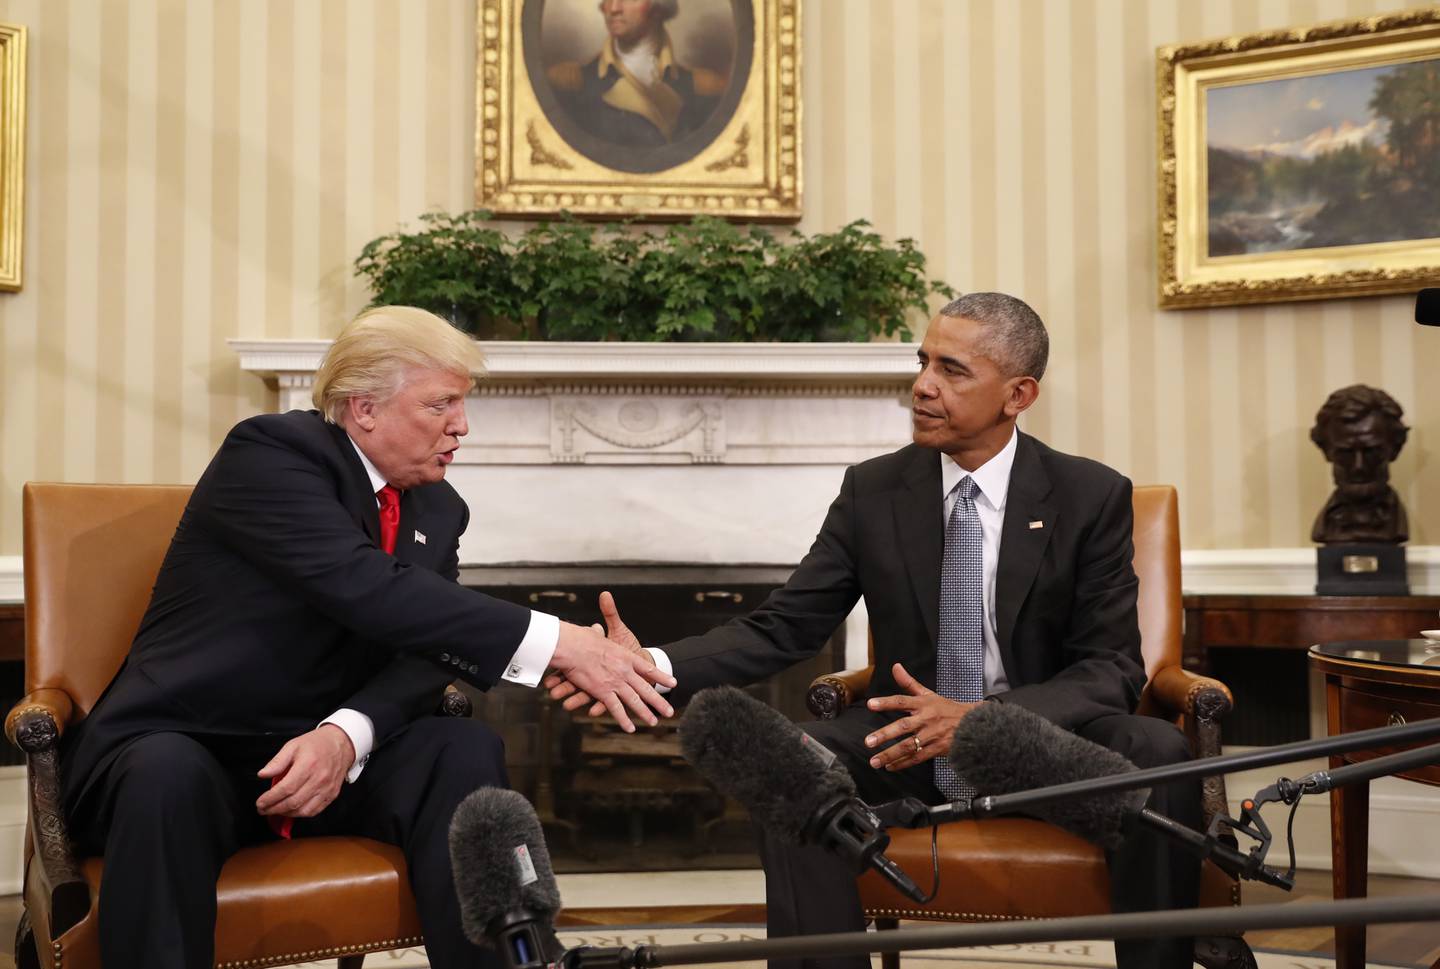 President Barack Obama shakes hands with President-elect Donald Trump in the Oval Office of the White House in Washington, Thursday, Nov. 10, 2016. President Trump and his allies are harking back to his own transition four years ago to make a false argument that his own presidency was denied a fair chance for a clean launch. Press secretary Kayleigh McEnany laid out the case from the White House podium last week. Obama, who had portrayed Trump as an existential threat to the nation, invited the president-elect to the White House and visited with him in the Oval Office. Obama's aides also offered help to Trump's incoming staffers. (AP Photo/Pablo Martinez Monsivais)